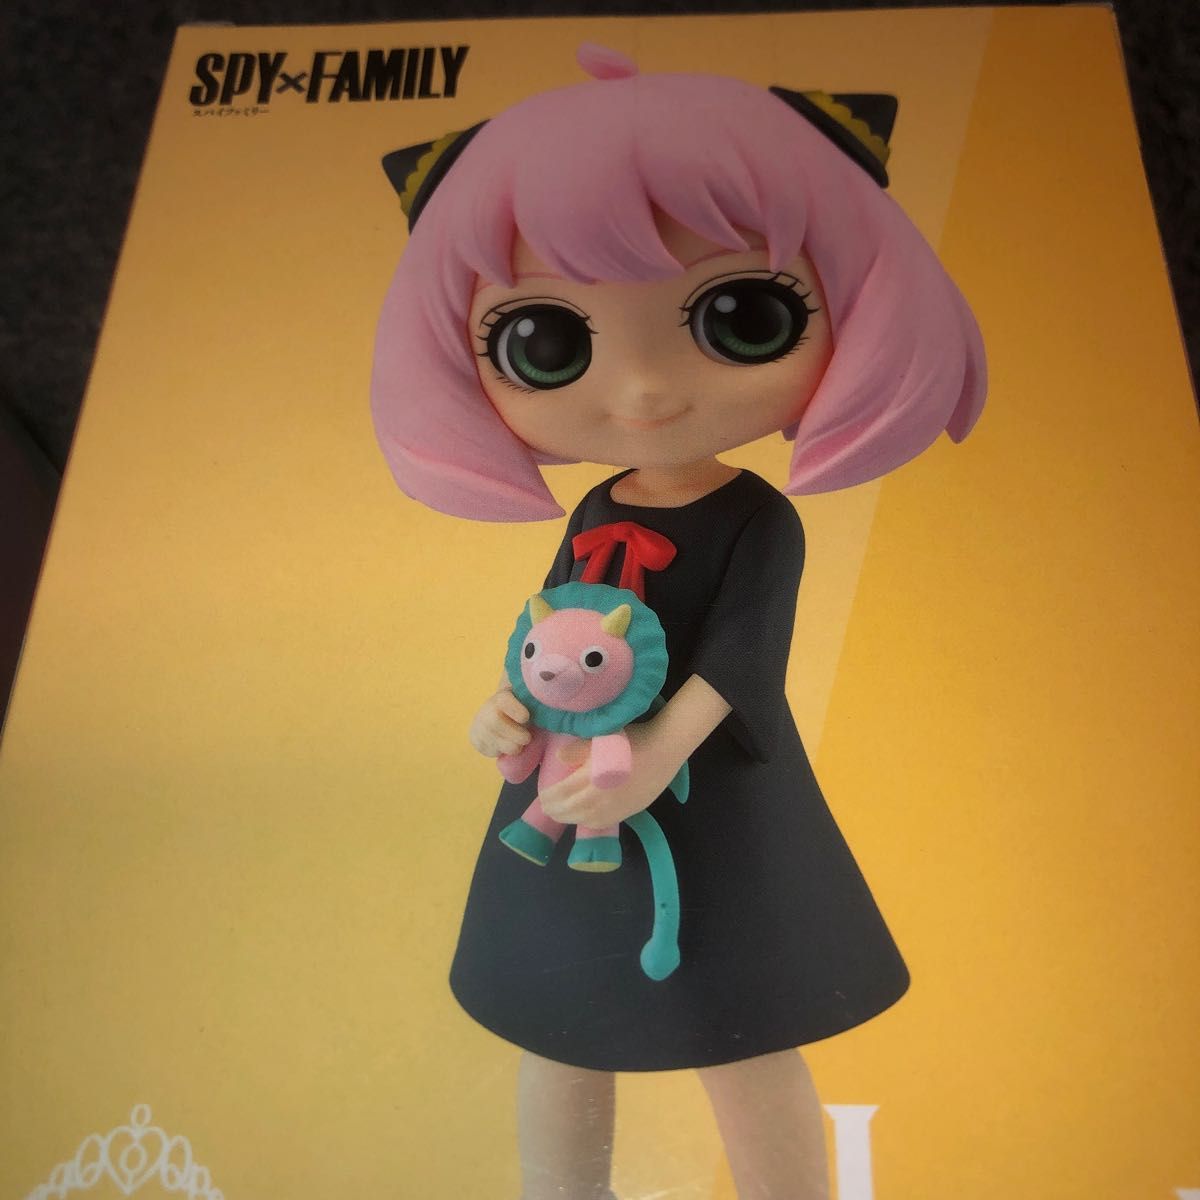 SPY×FAMILY Qposket アーニャ・フォージャー2 ABカラー2種セット　新品未使用　翌日発送